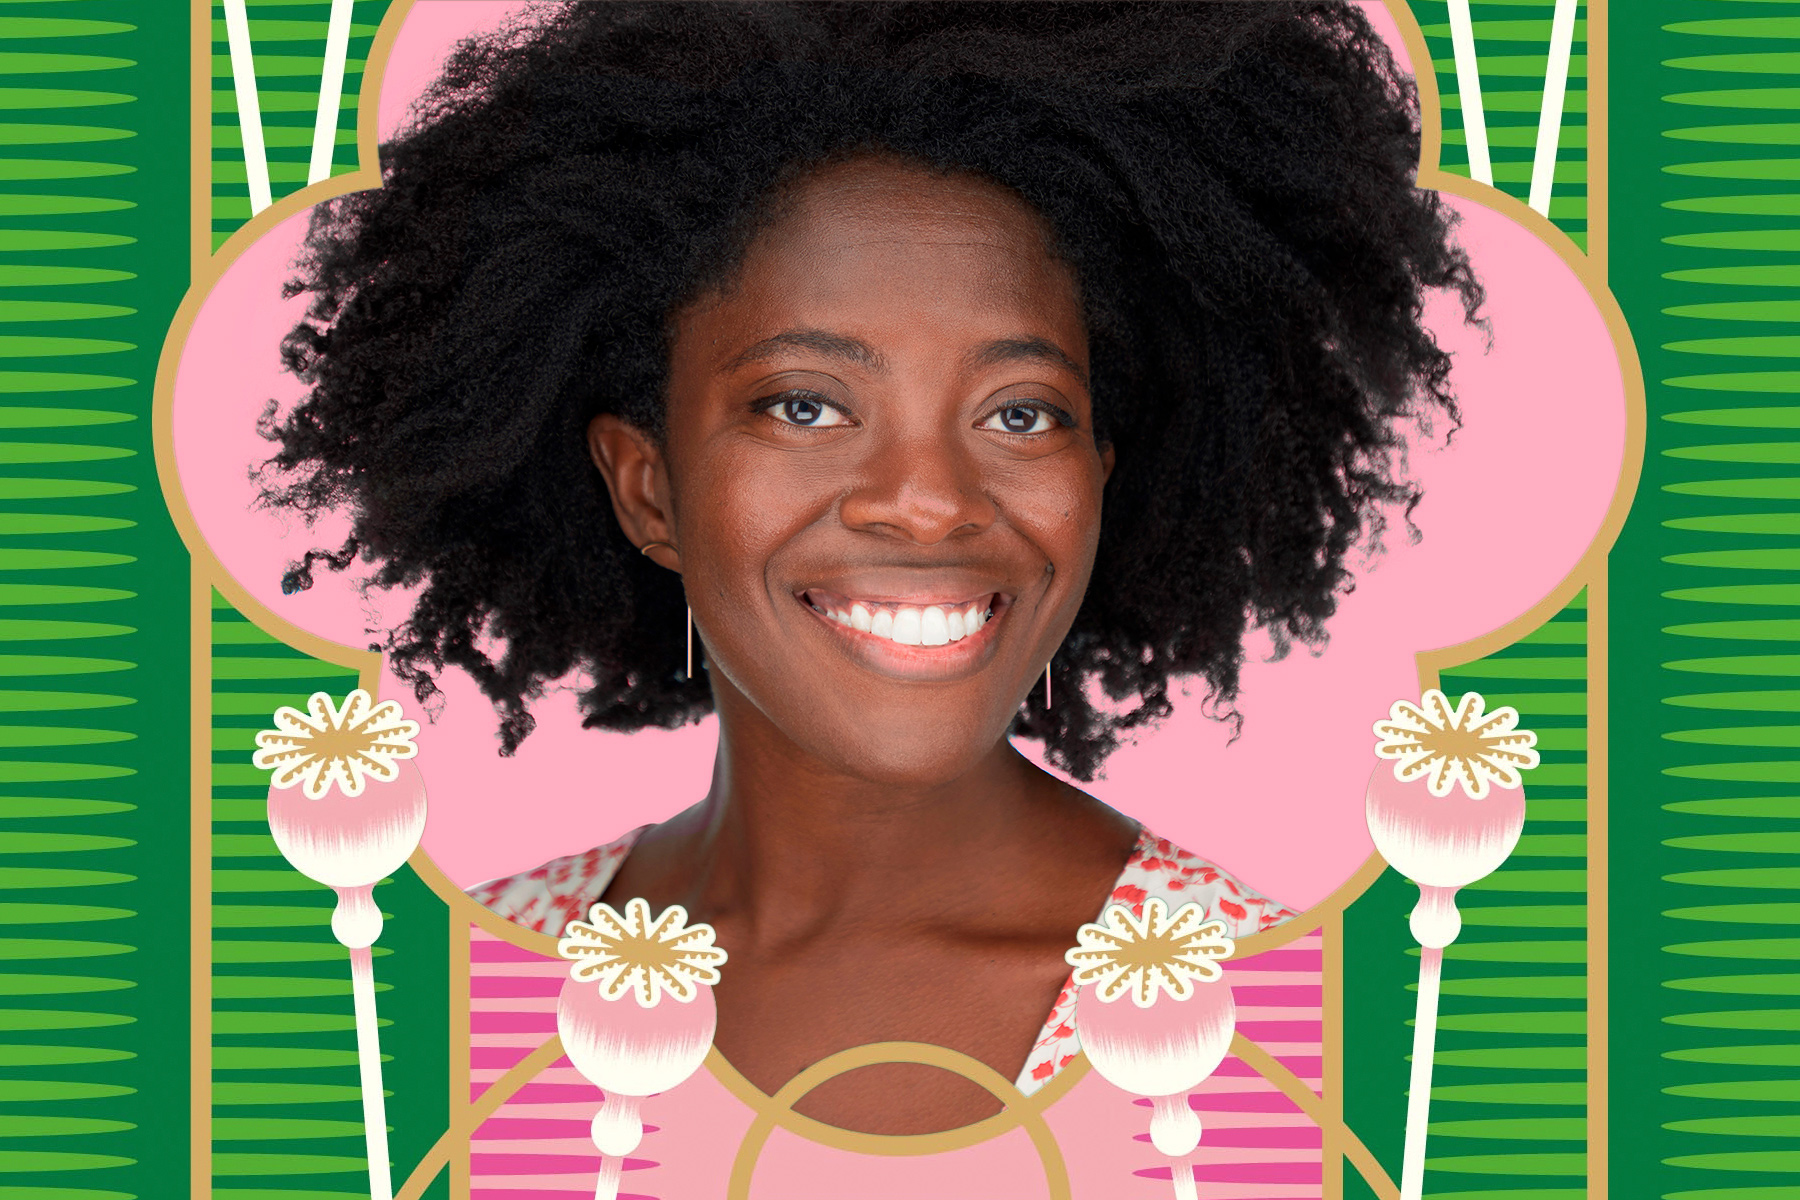 A photograph of Yaa Gyasi surrounded by the flowers and patterns of her book cover